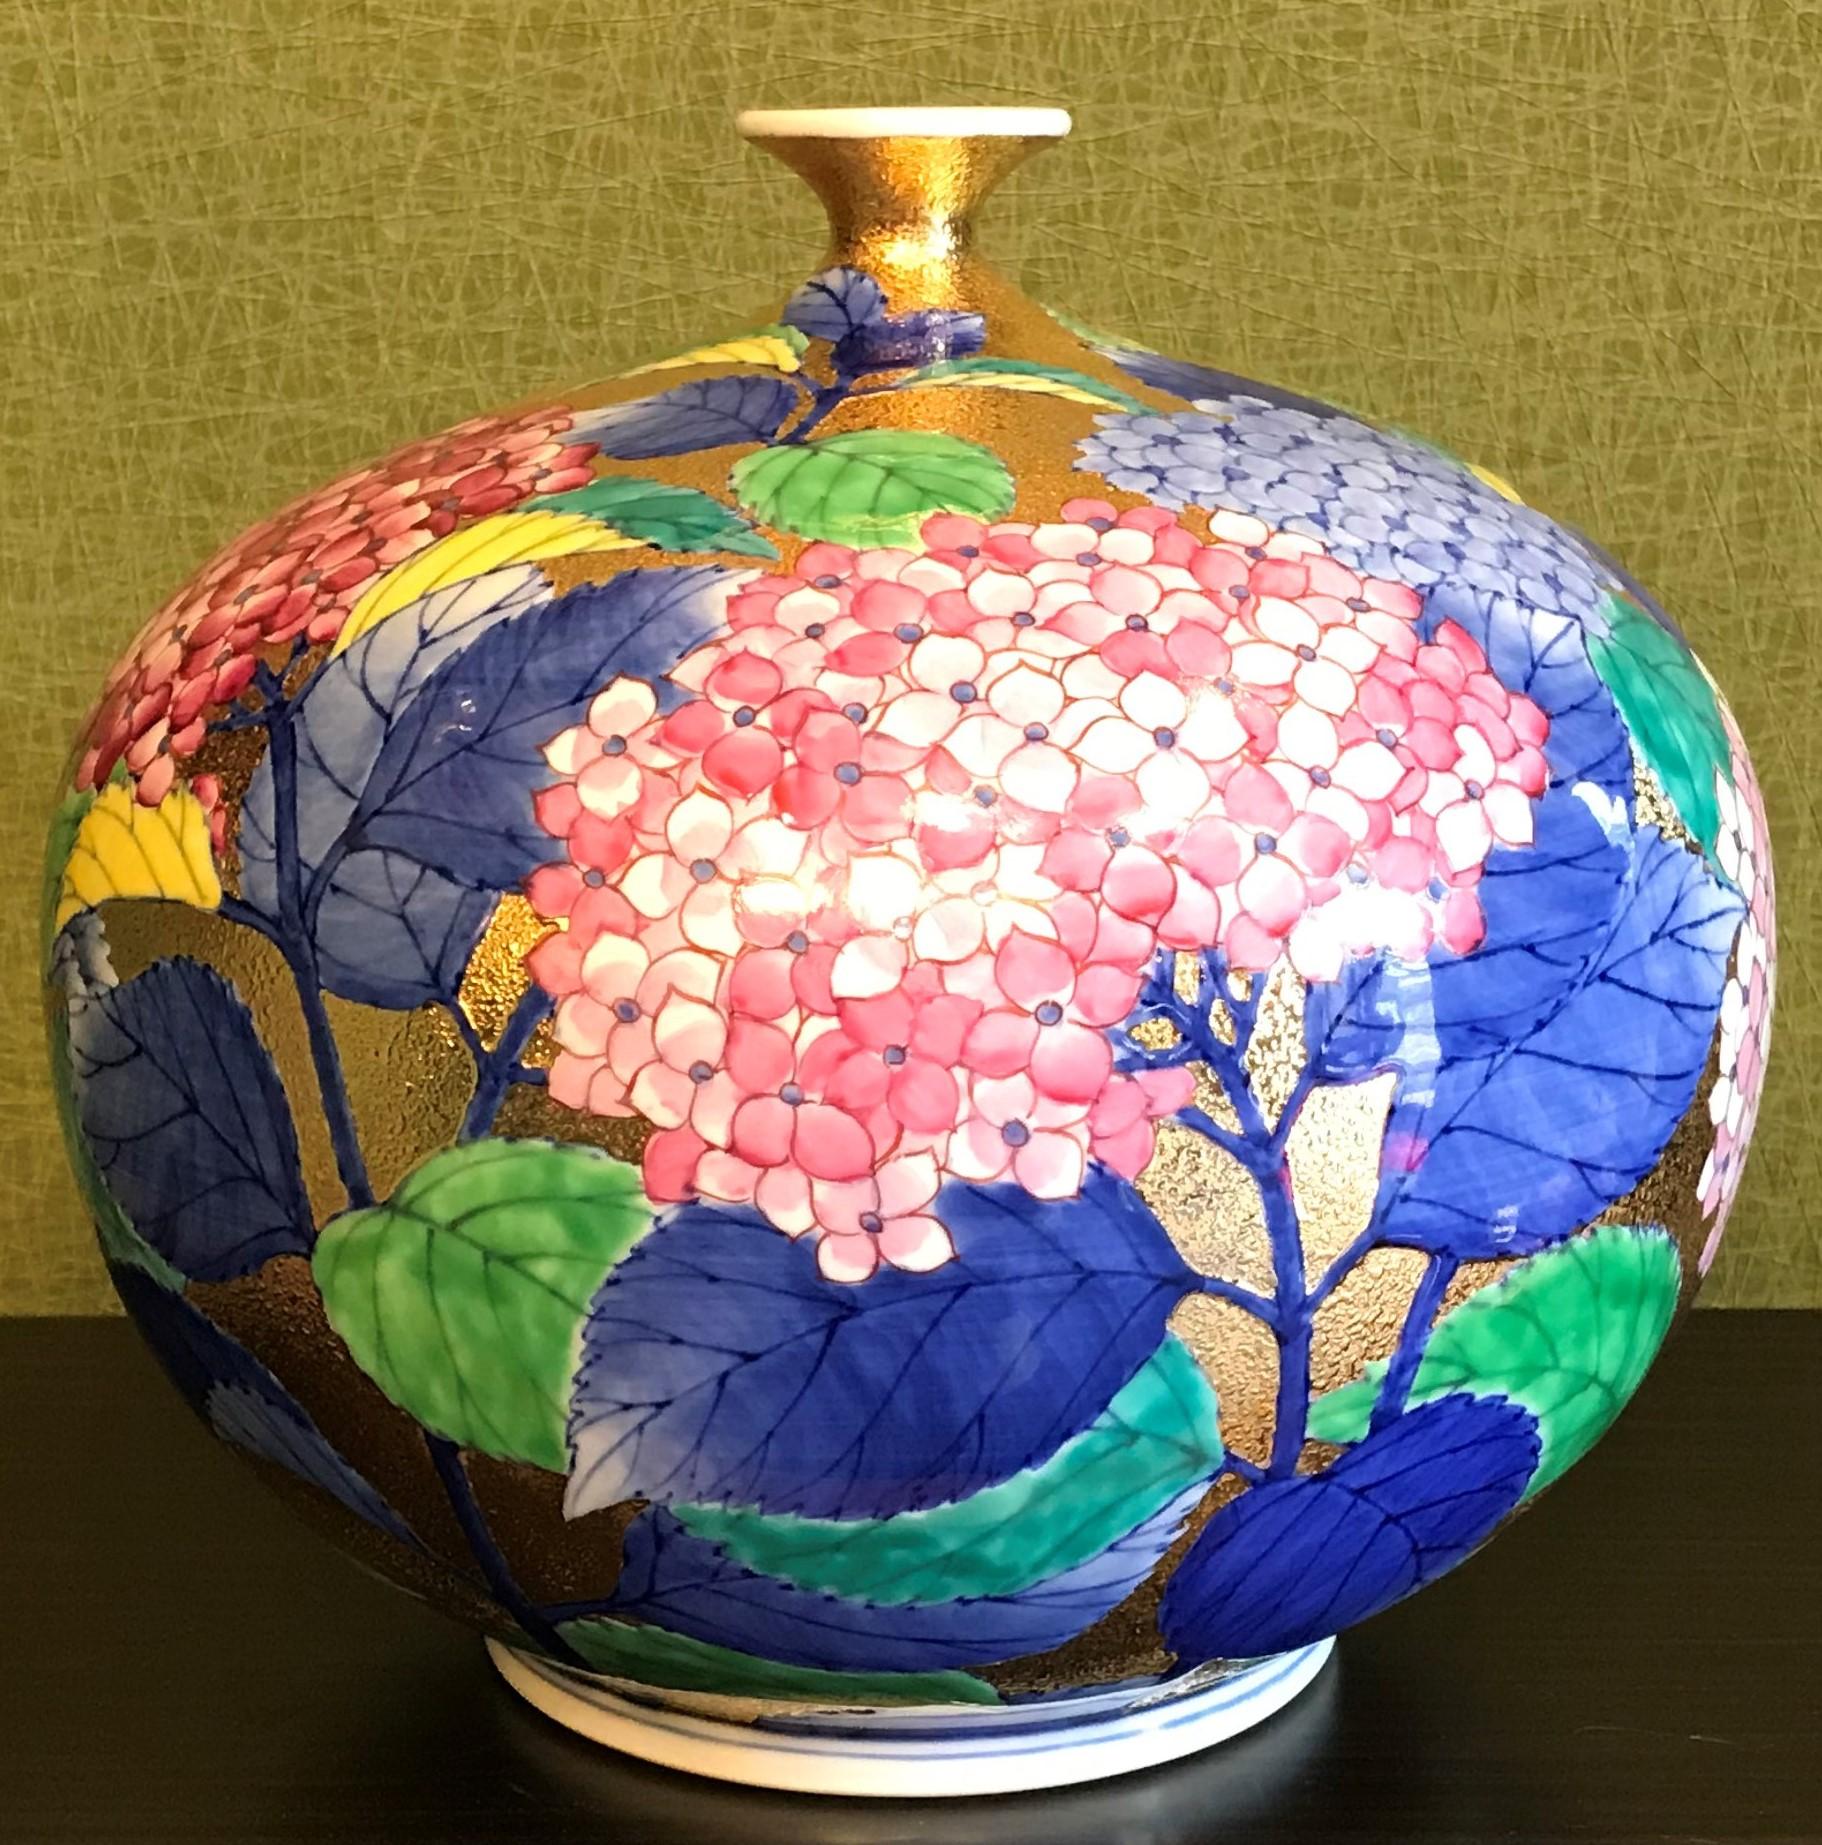  Exceptional contemporary Japanese porcelain vase, gilded and hand painted in pink, red, green, blue and white on an attractive gilded globular body, a signed masterpiece by highly respected award-winning master porcelain artist from Imari-Arita